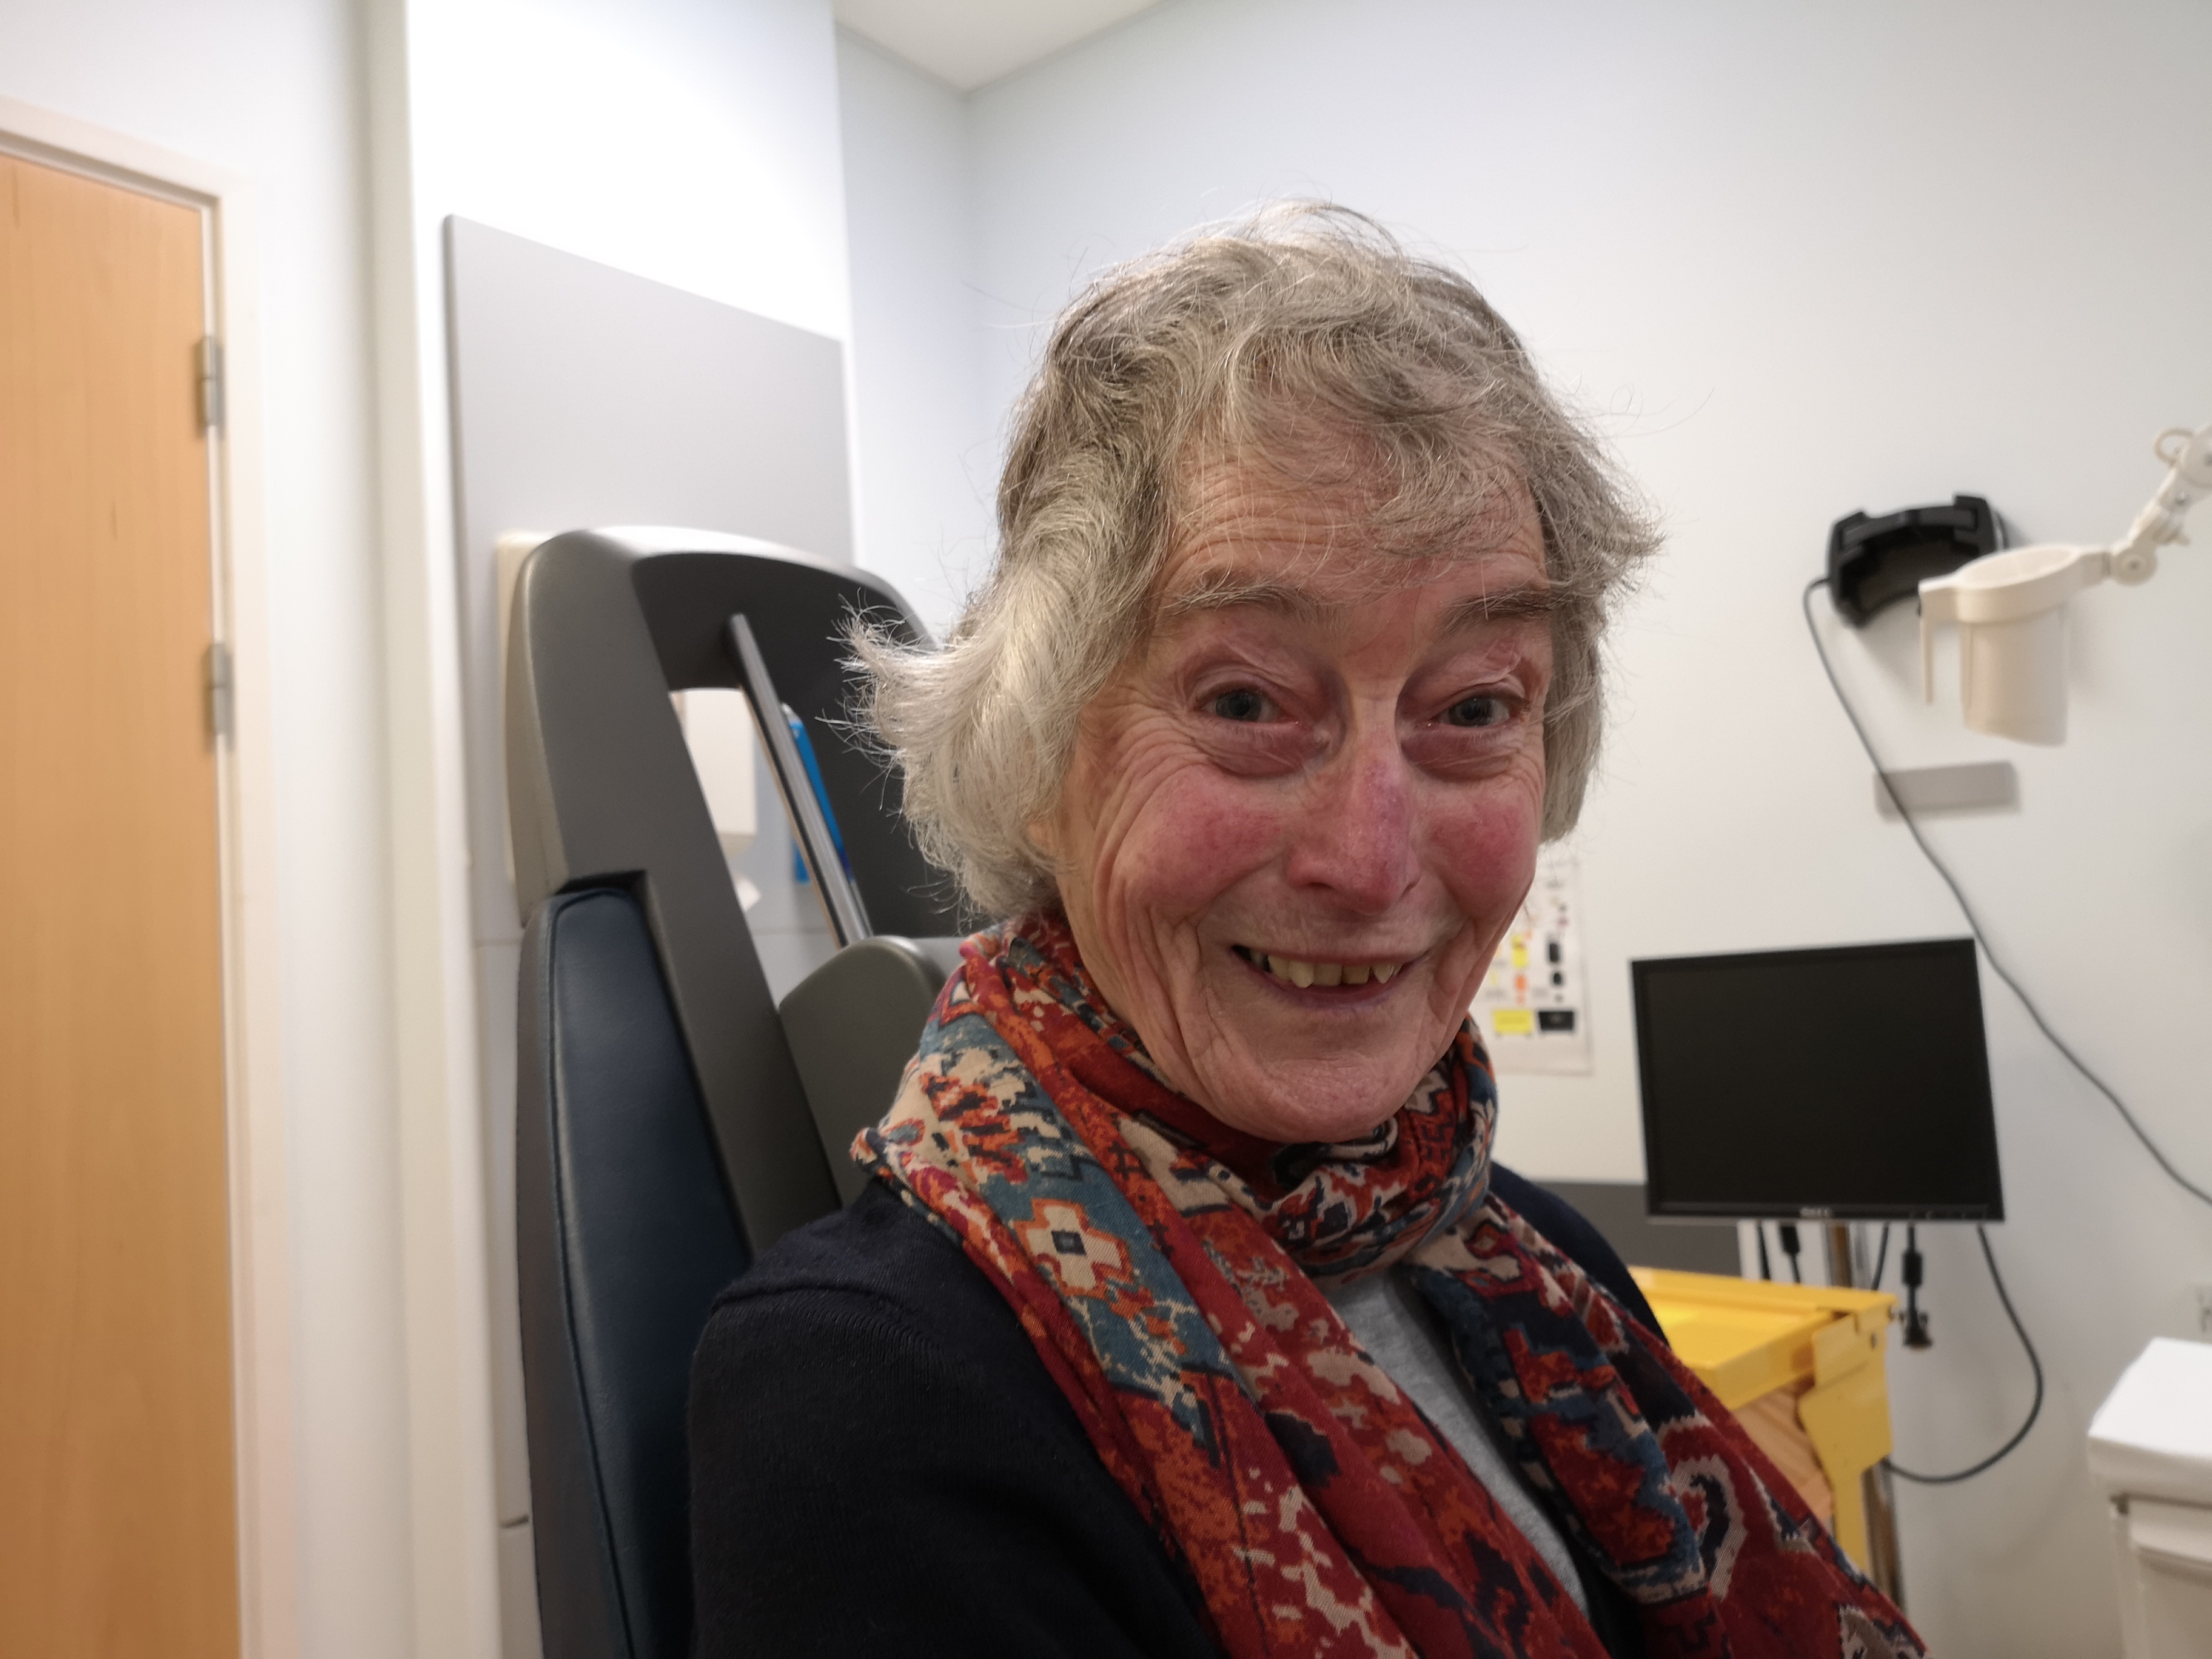 Janet Osborne, 80, from Oxford, underwent a gene therapy operation to tackle the loss of her eye sight due to the condition AMD. (NIHR Oxford Biomedical Research Centre)